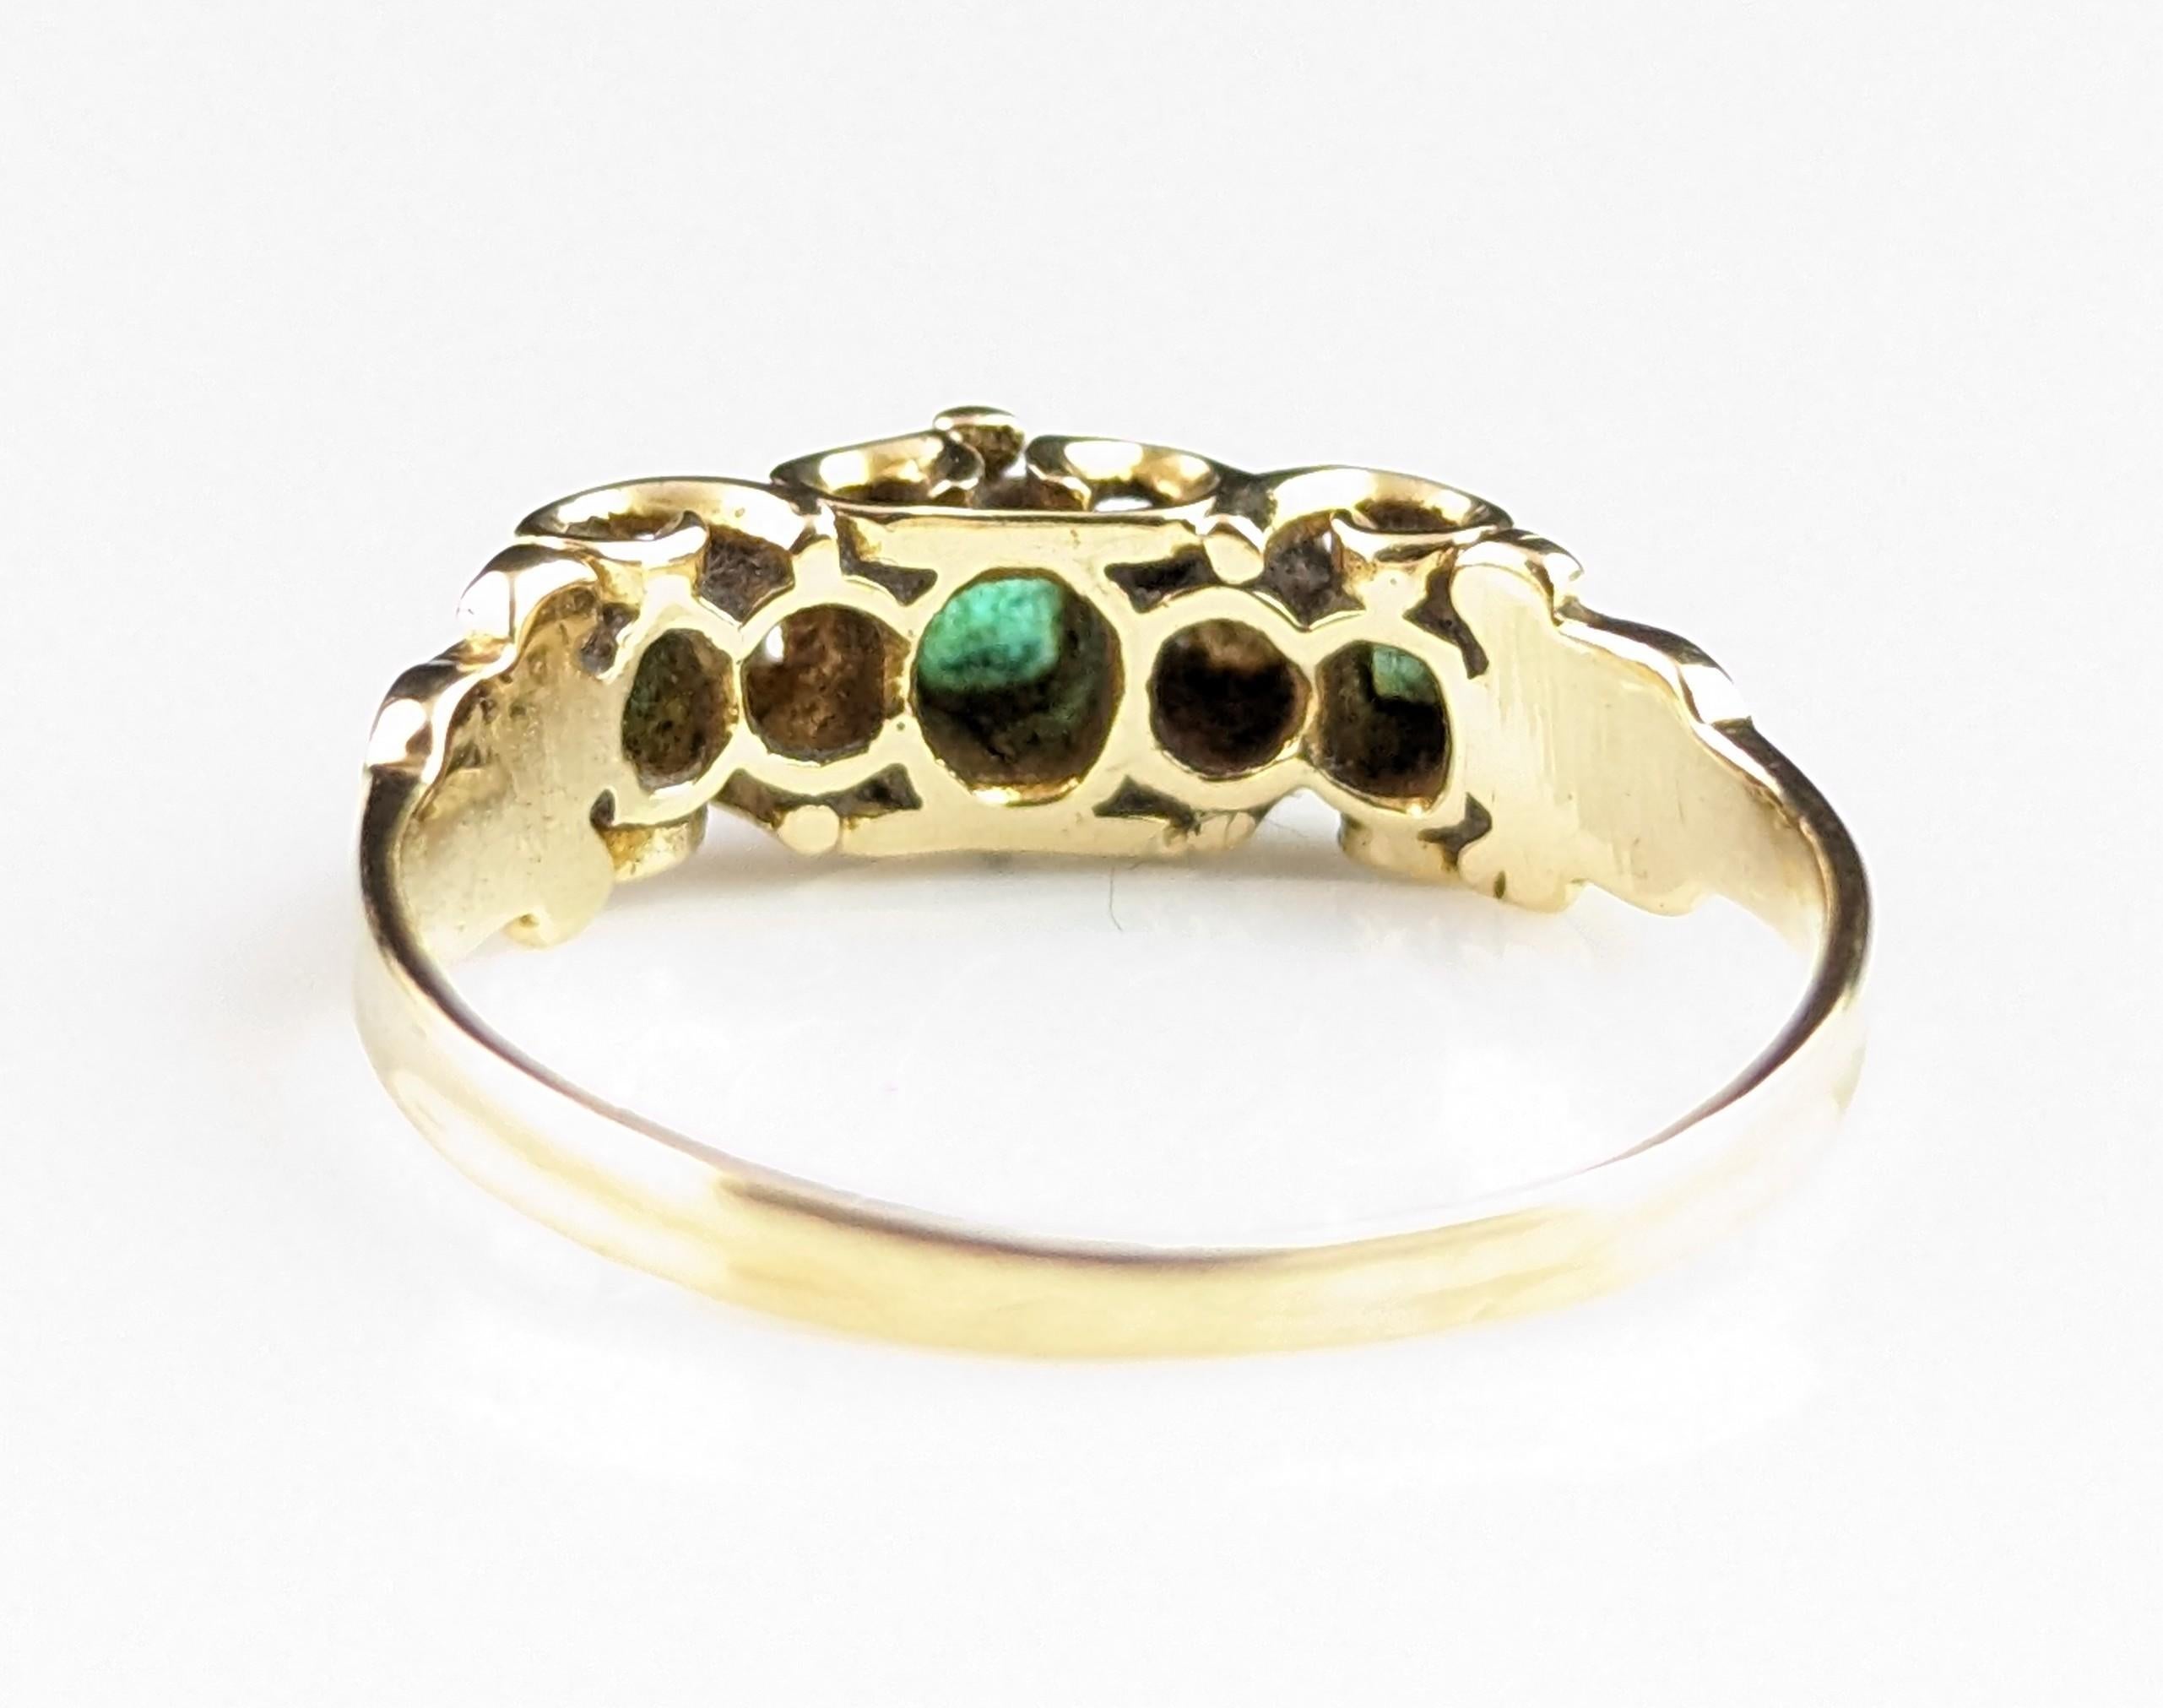 Antique Emerald and old cut diamond ring, 18k gold, Victorian five stone  4